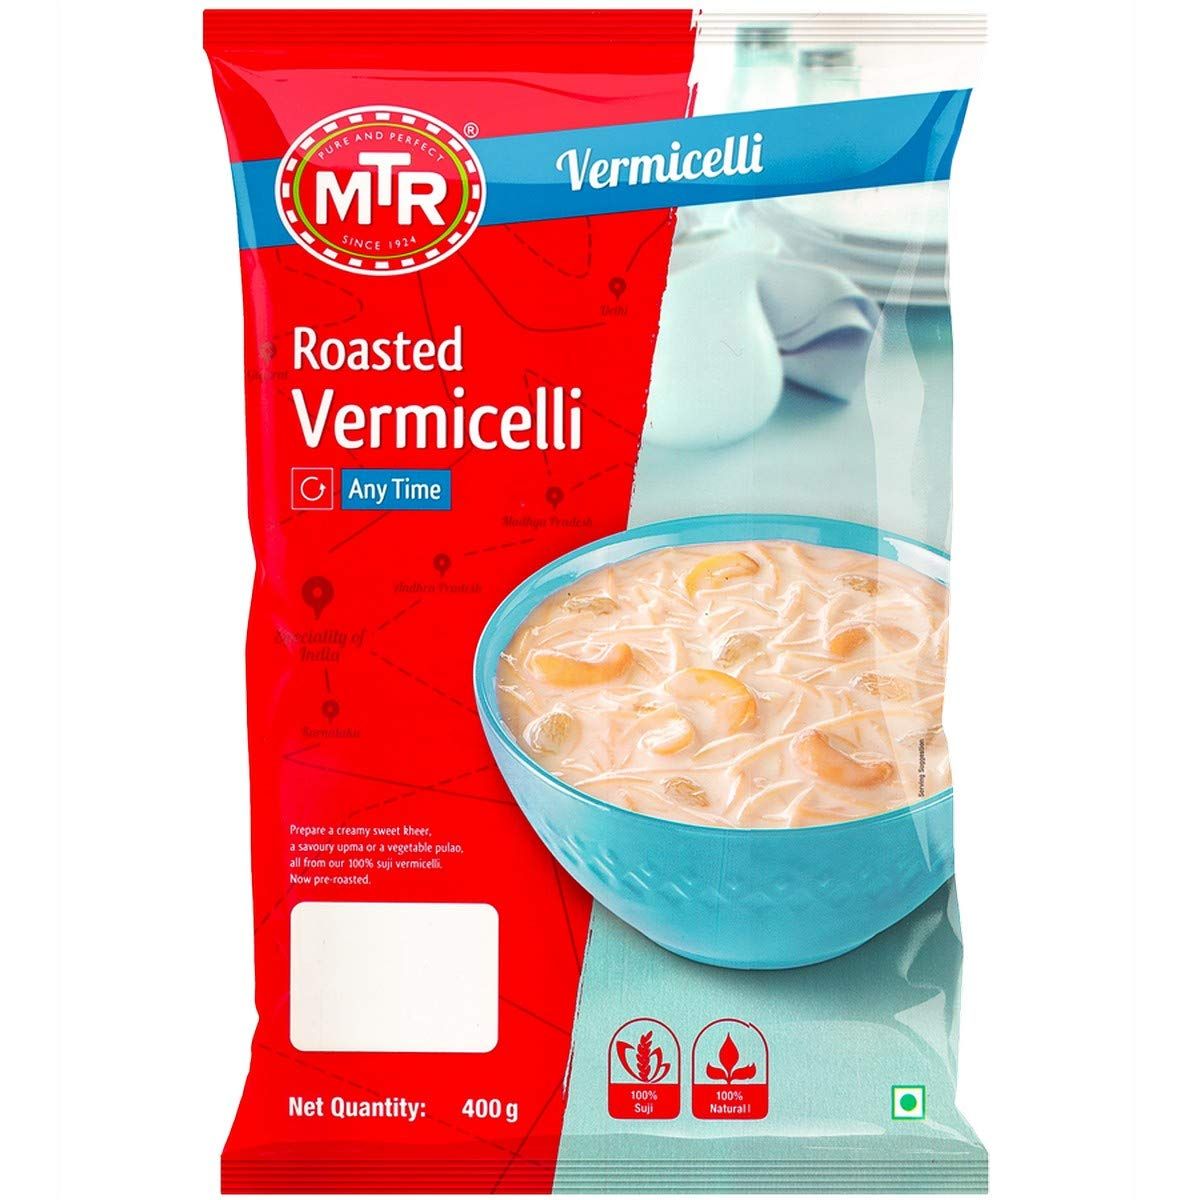 MTR Roasted Vermicelli Image